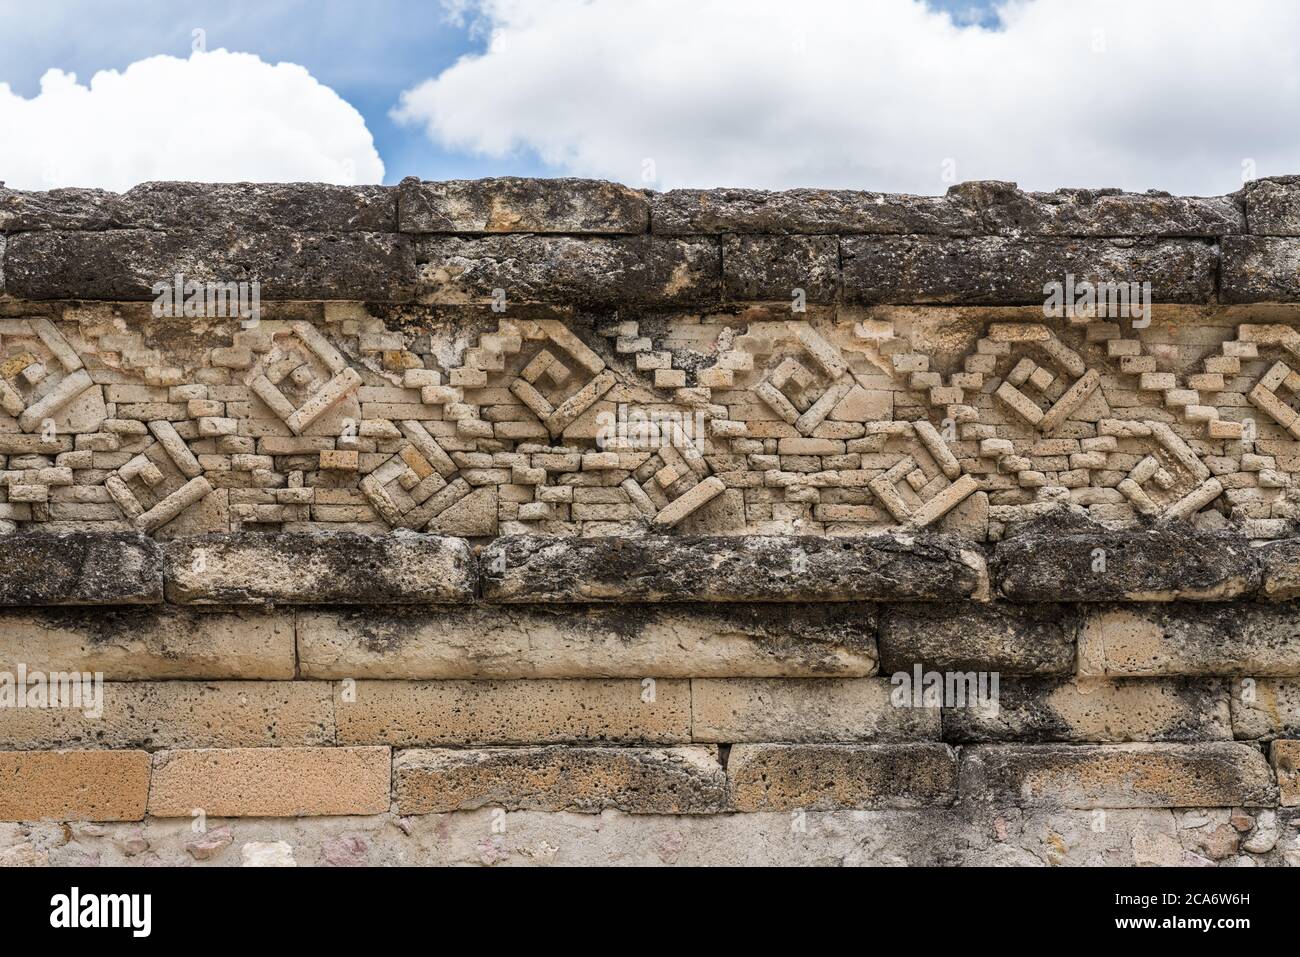 Detail of the stone fretwork panels in the ruins of the Zapotec city of Mitla, Oaxaca, Mexico.  A UNESCO World Heritage site. Stock Photo